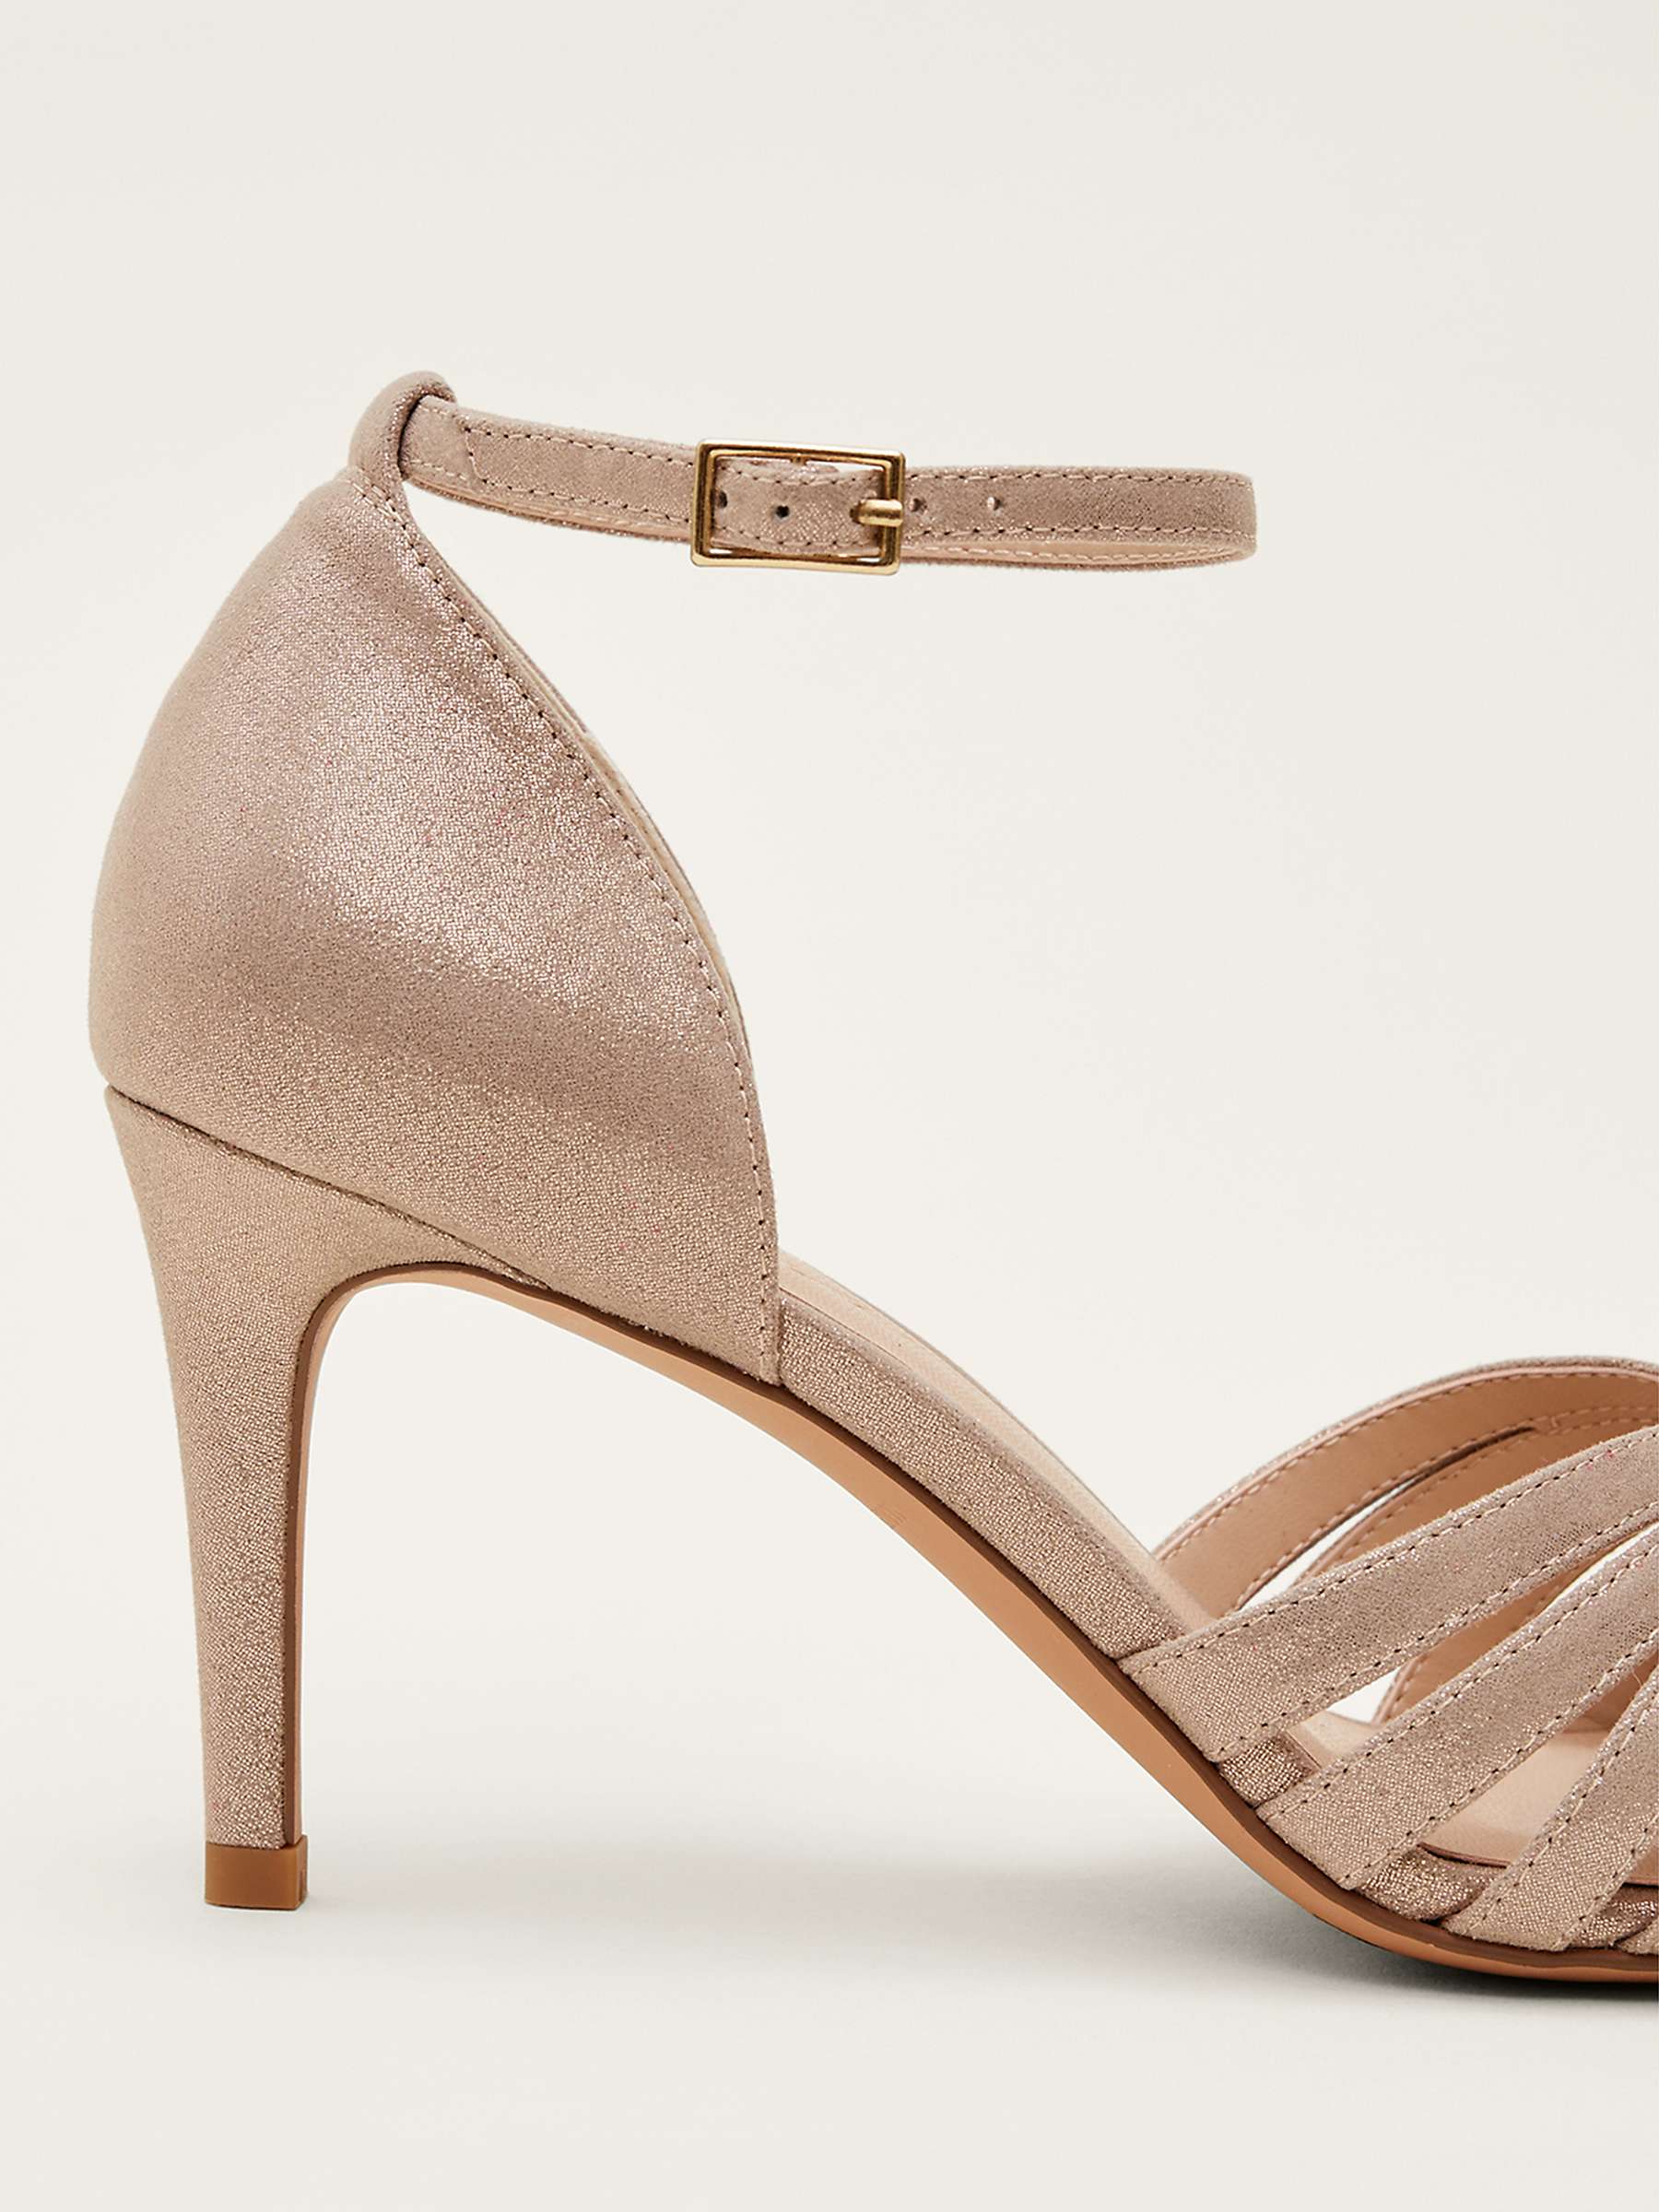 Buy Phase Eight Metallic Strappy Sandals, Gold Online at johnlewis.com